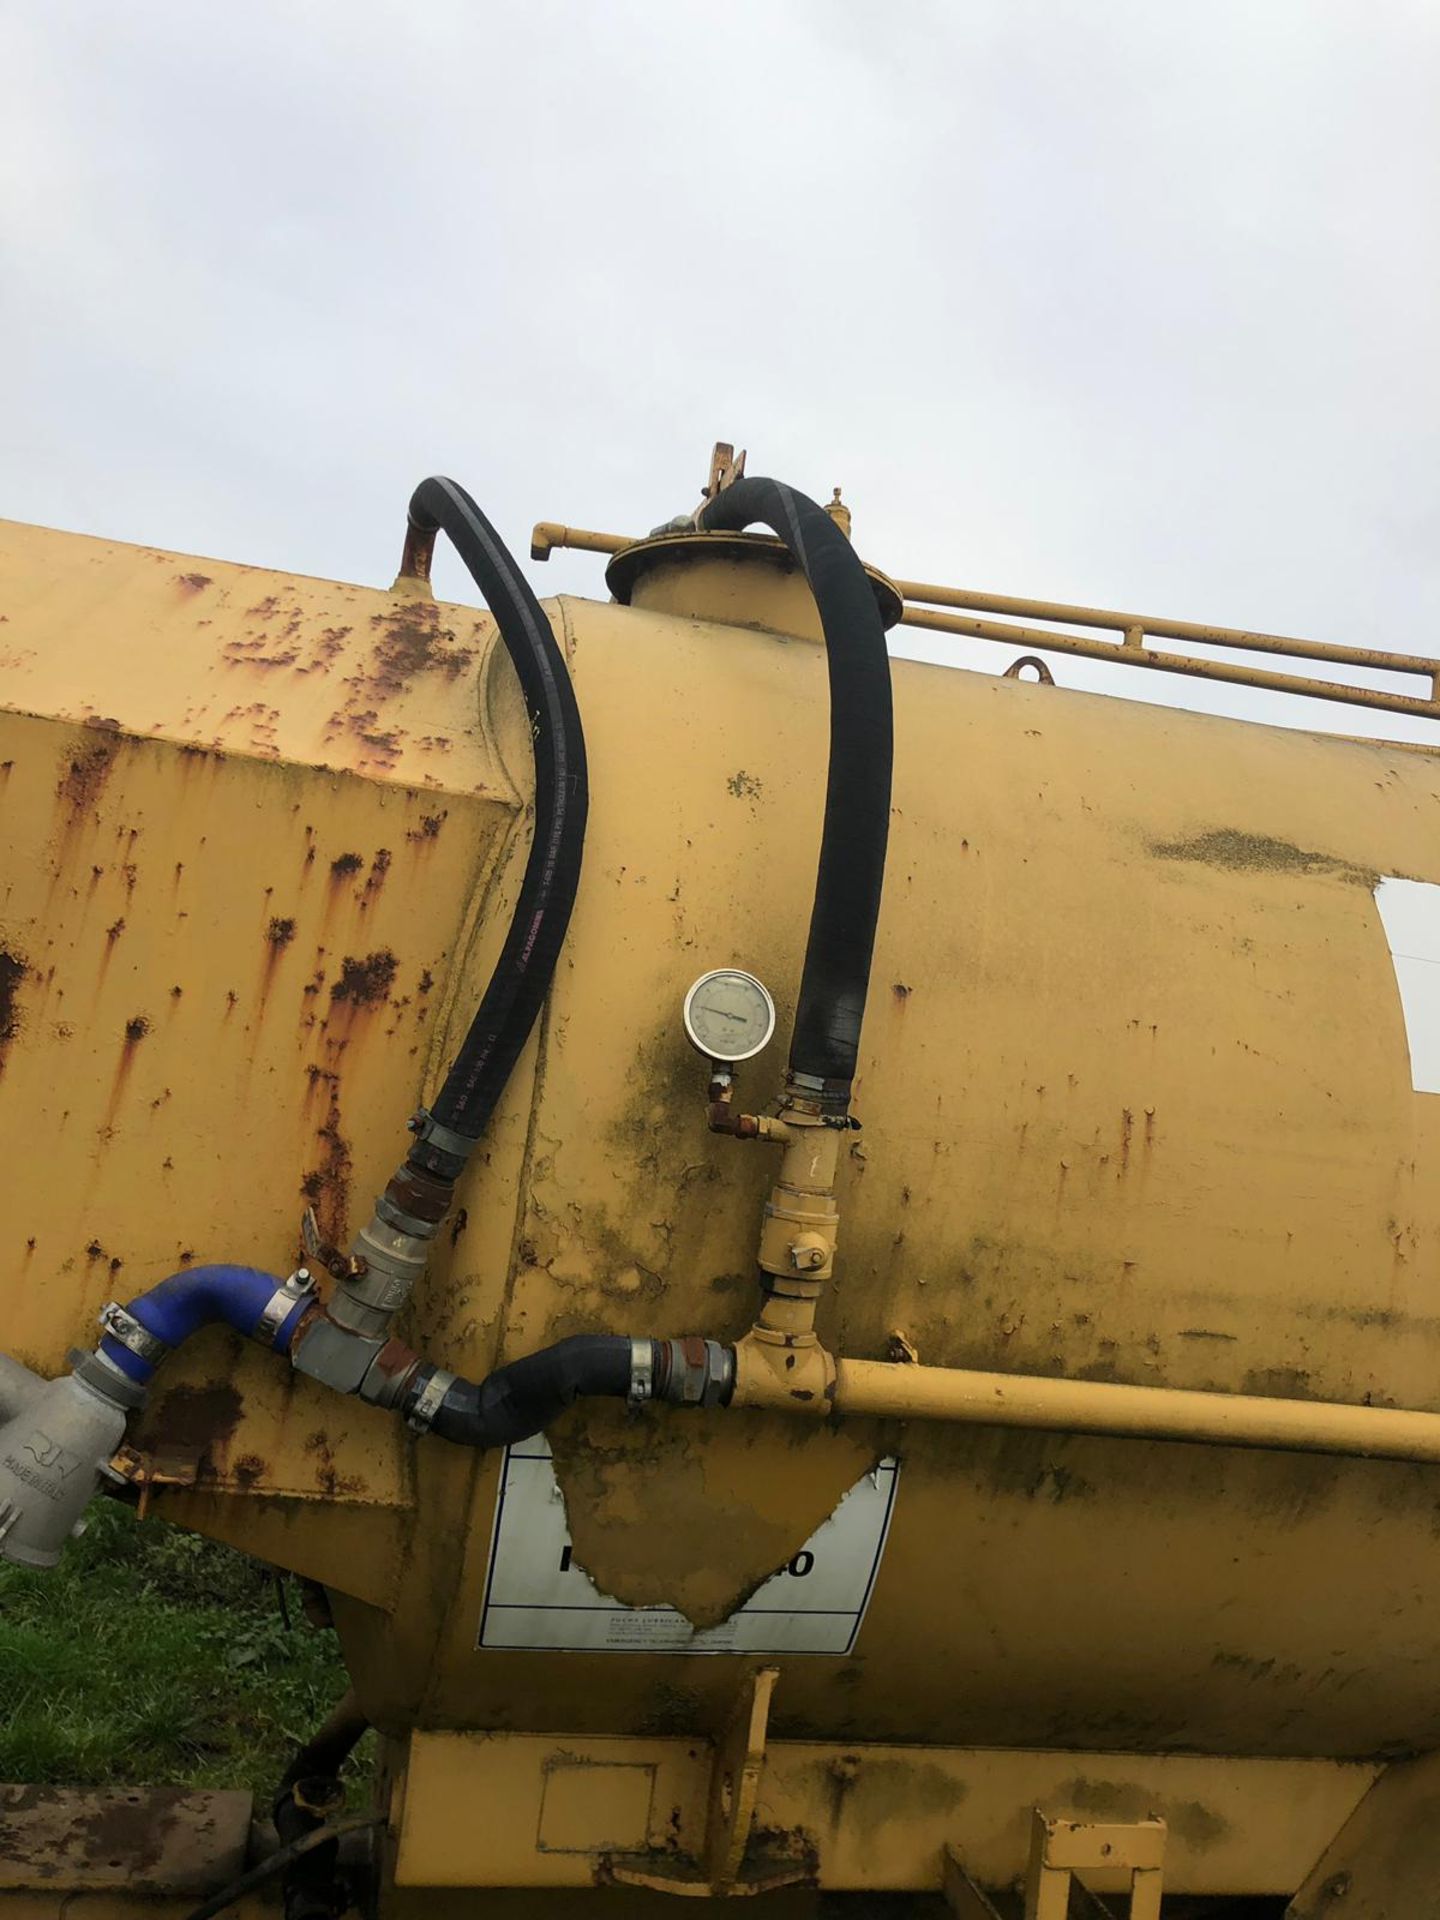 1989 TWIN AXLE TOW ABLE YELLOW OIL TANK, SERIAL NUMBER: VE 355 *PLUS VAT* - Image 8 of 10